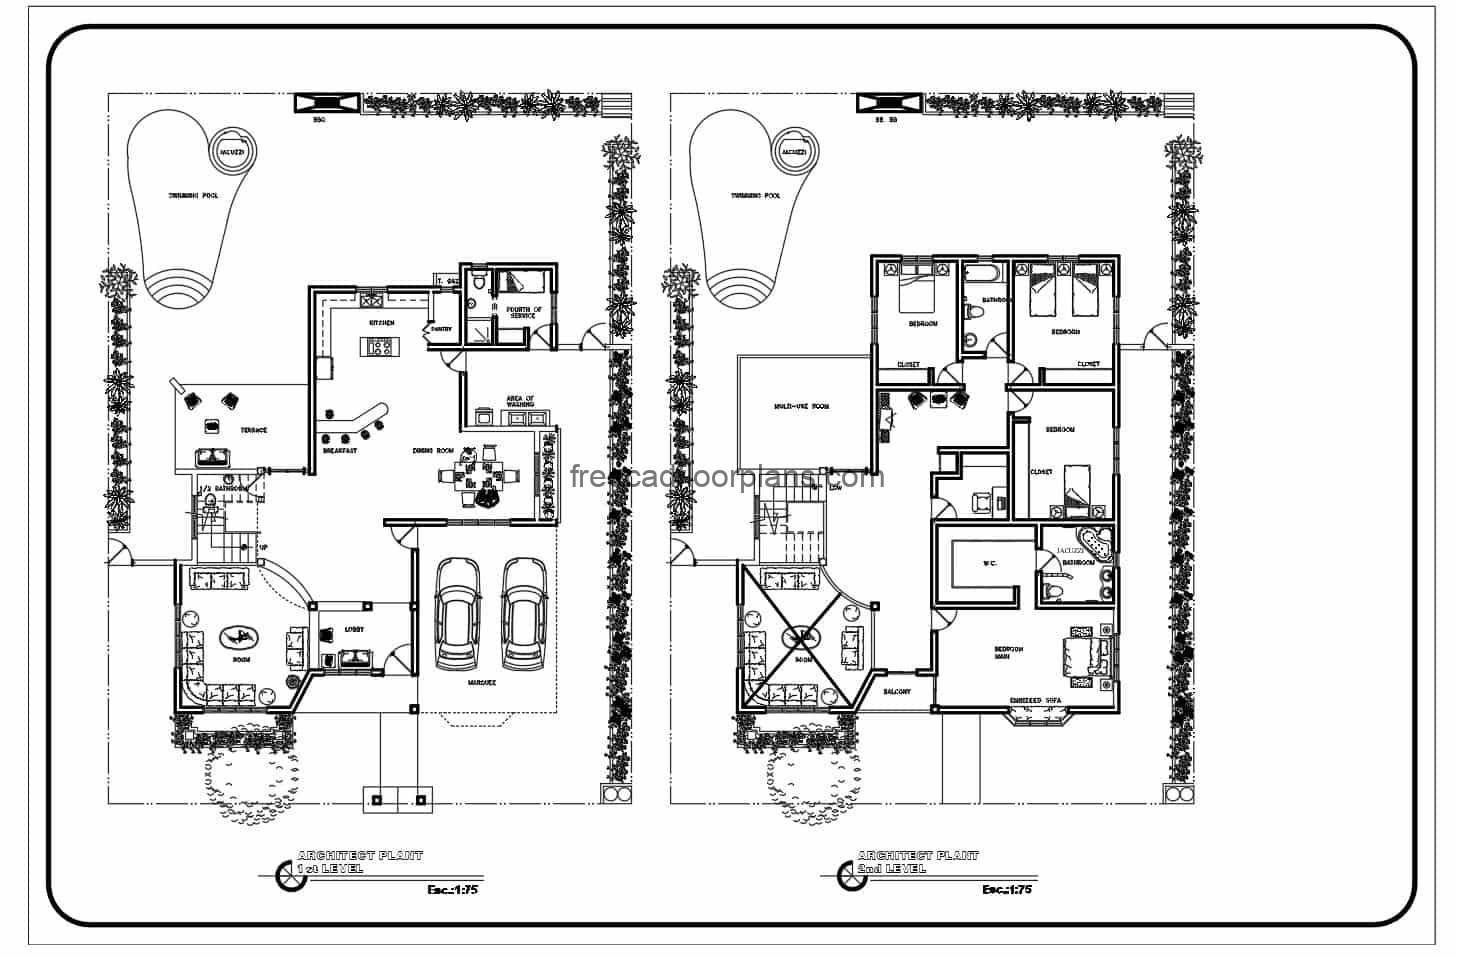 2D architectural plans of complete project in Autocad DWG format of concrete house of two levels with four rooms in total. double canopy on the first floor, living room, lobby, half bathroom under the stairs, breakfast room, kitchen, laundry area, rear terrace with swimming pool. Second level private area with family room and four bedrooms, with multipurpose room. 2D blueprints editable CAD for free download